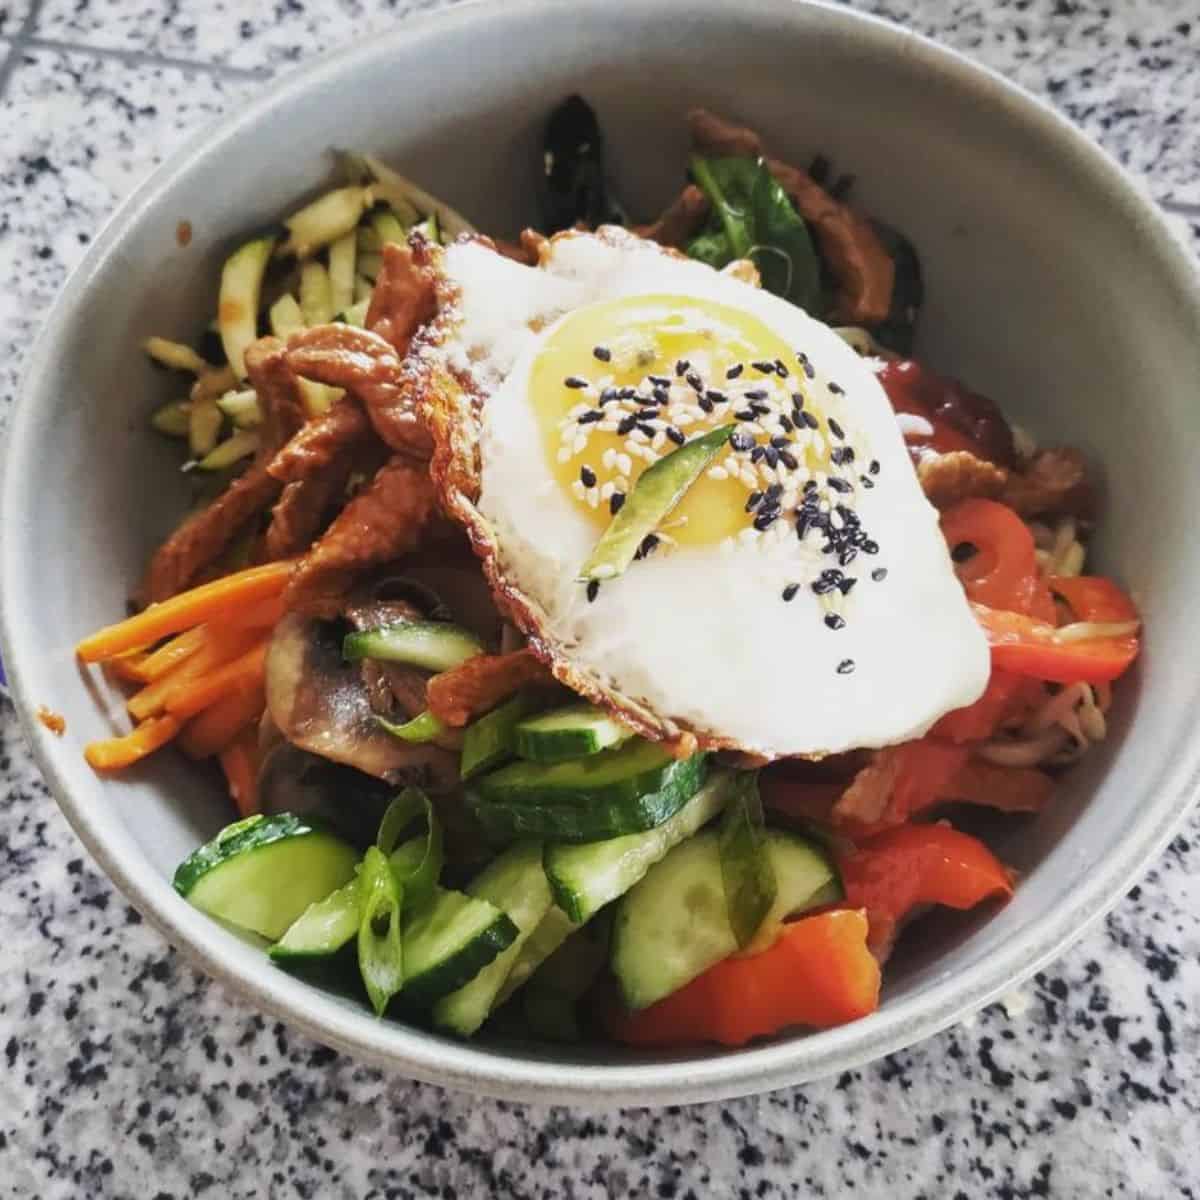 A delicious bowl of bibimbap which is a little different from Dosirak